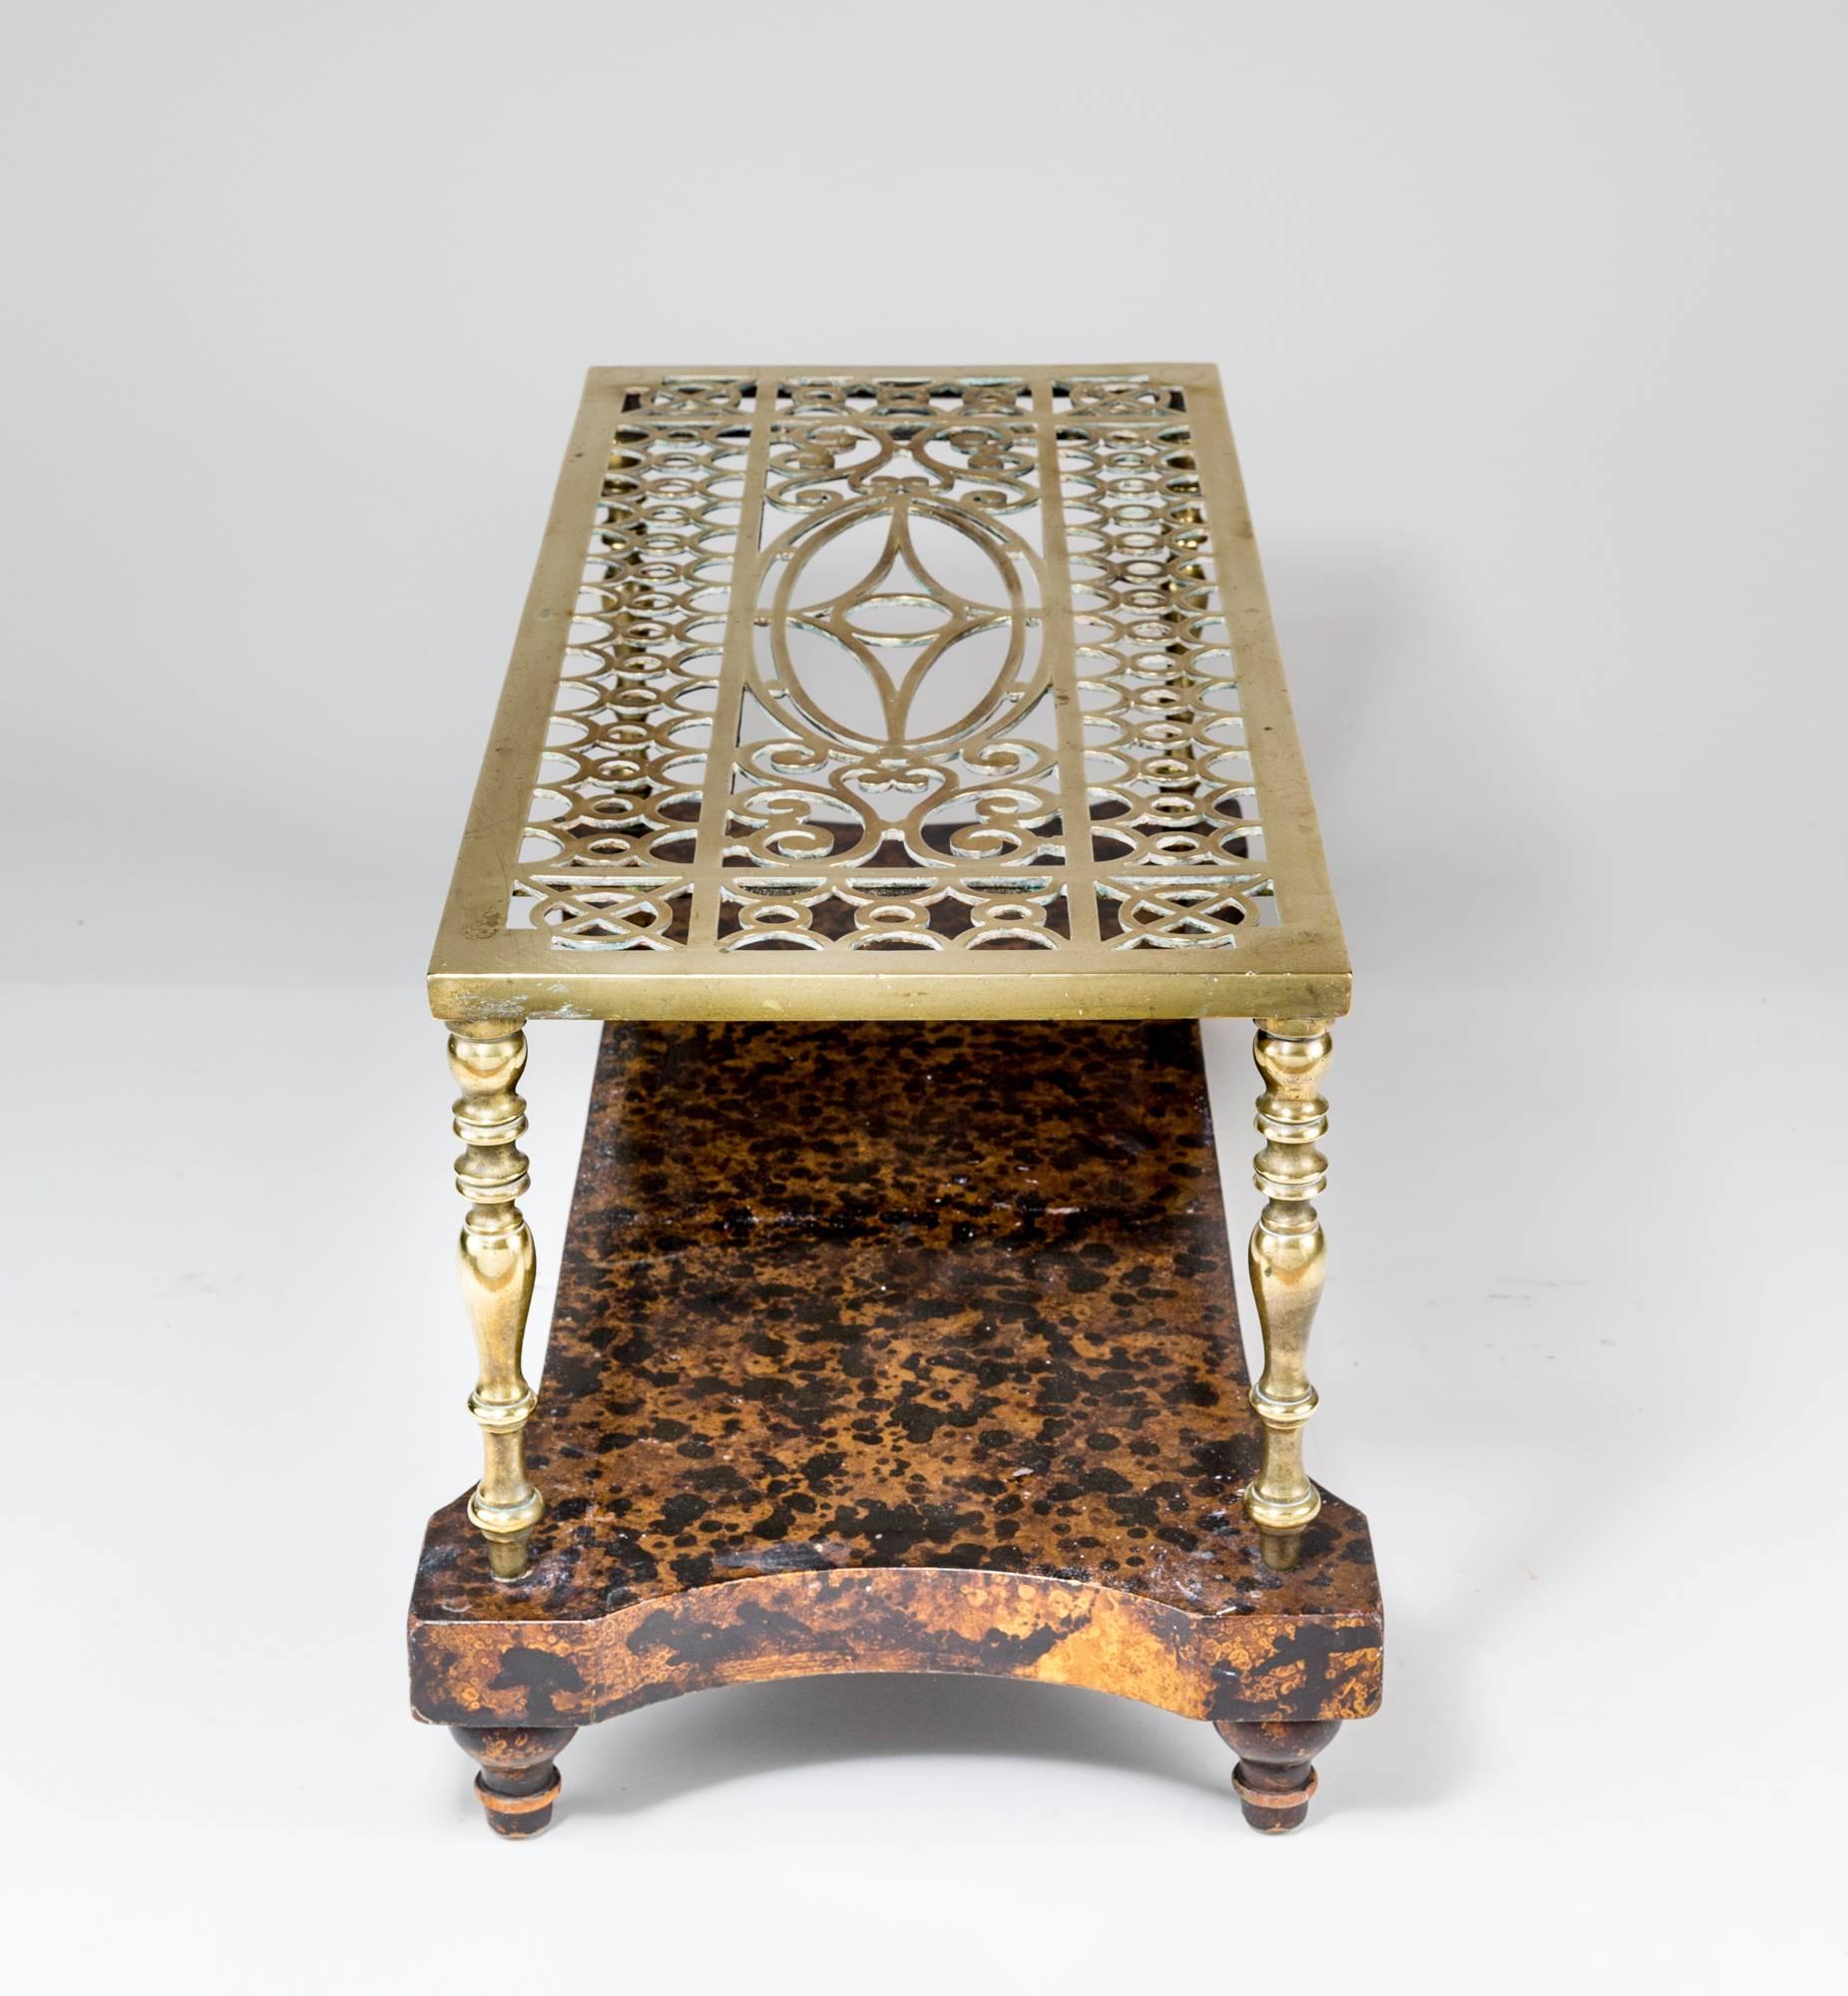 Antique rectangular low coffee or end table consisting of a cast brass trivet on a painted faux tortoiseshell base. The top of the trivet is decorated with pierced ovals, circles and C-scroll designs, the legs are of balusters shapes.